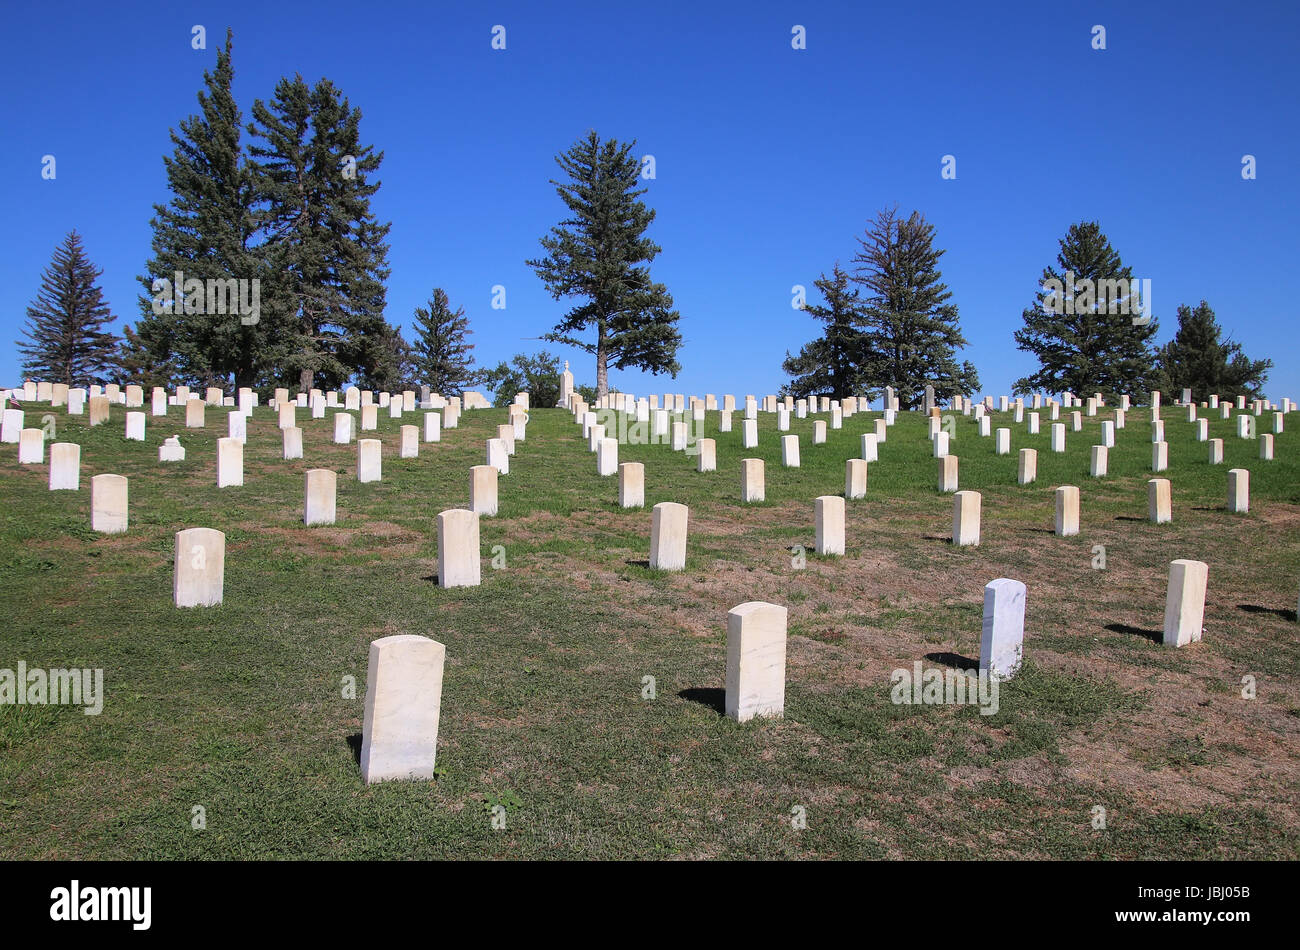 Custer National Cemetery at Little Bighorn Battlefield National Monument, Montana, USA. It preserves the site of the June 25 and 26, 1876, Battle of t Stock Photo